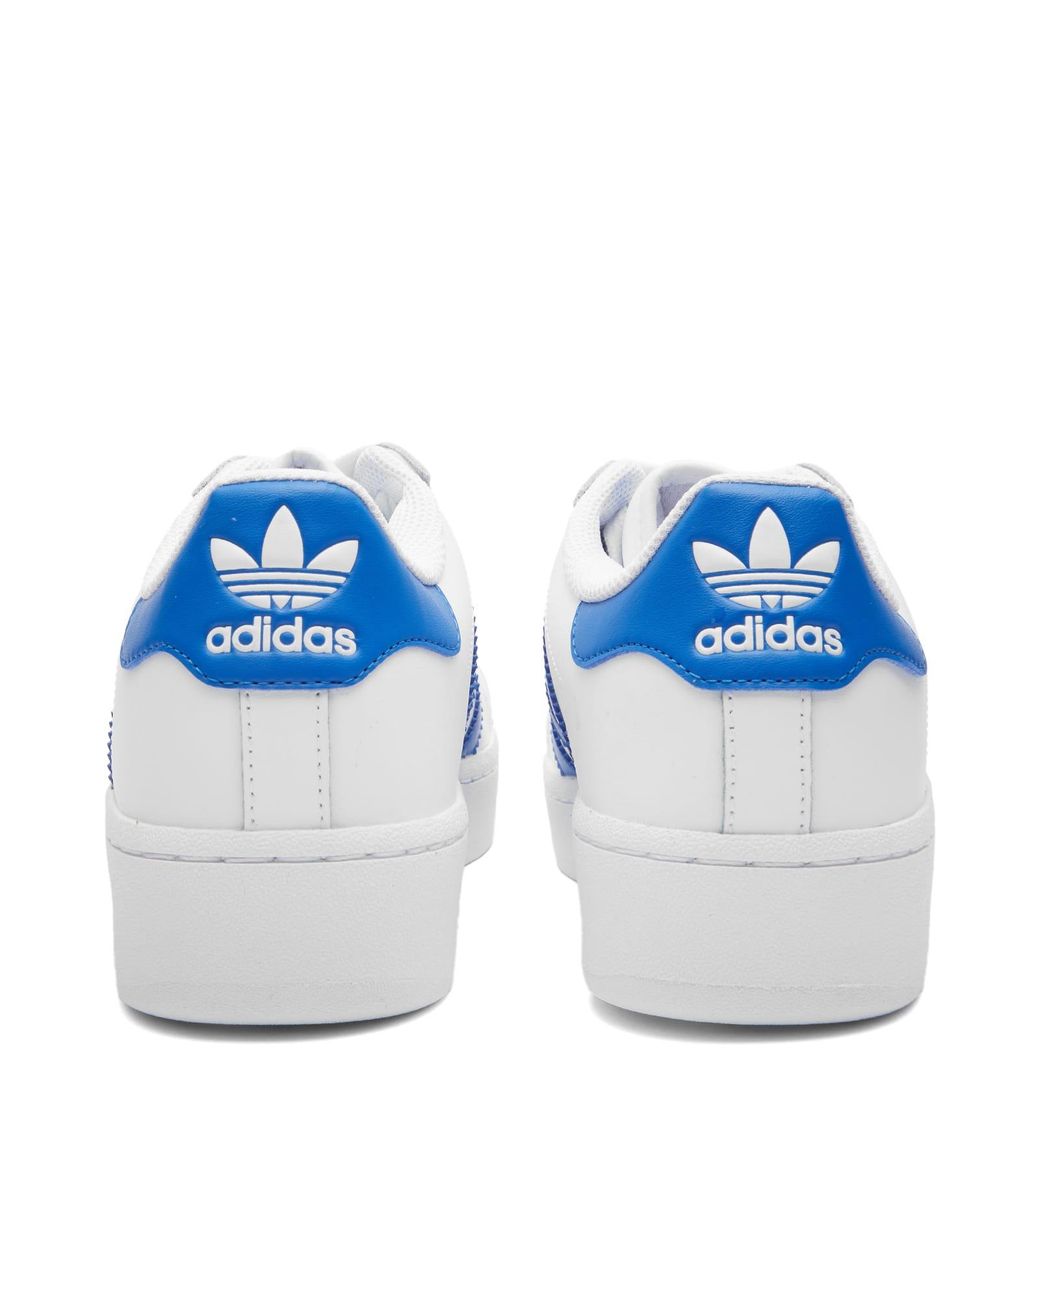 adidas Superstar Xlg Sneakers in Blue | Lyst